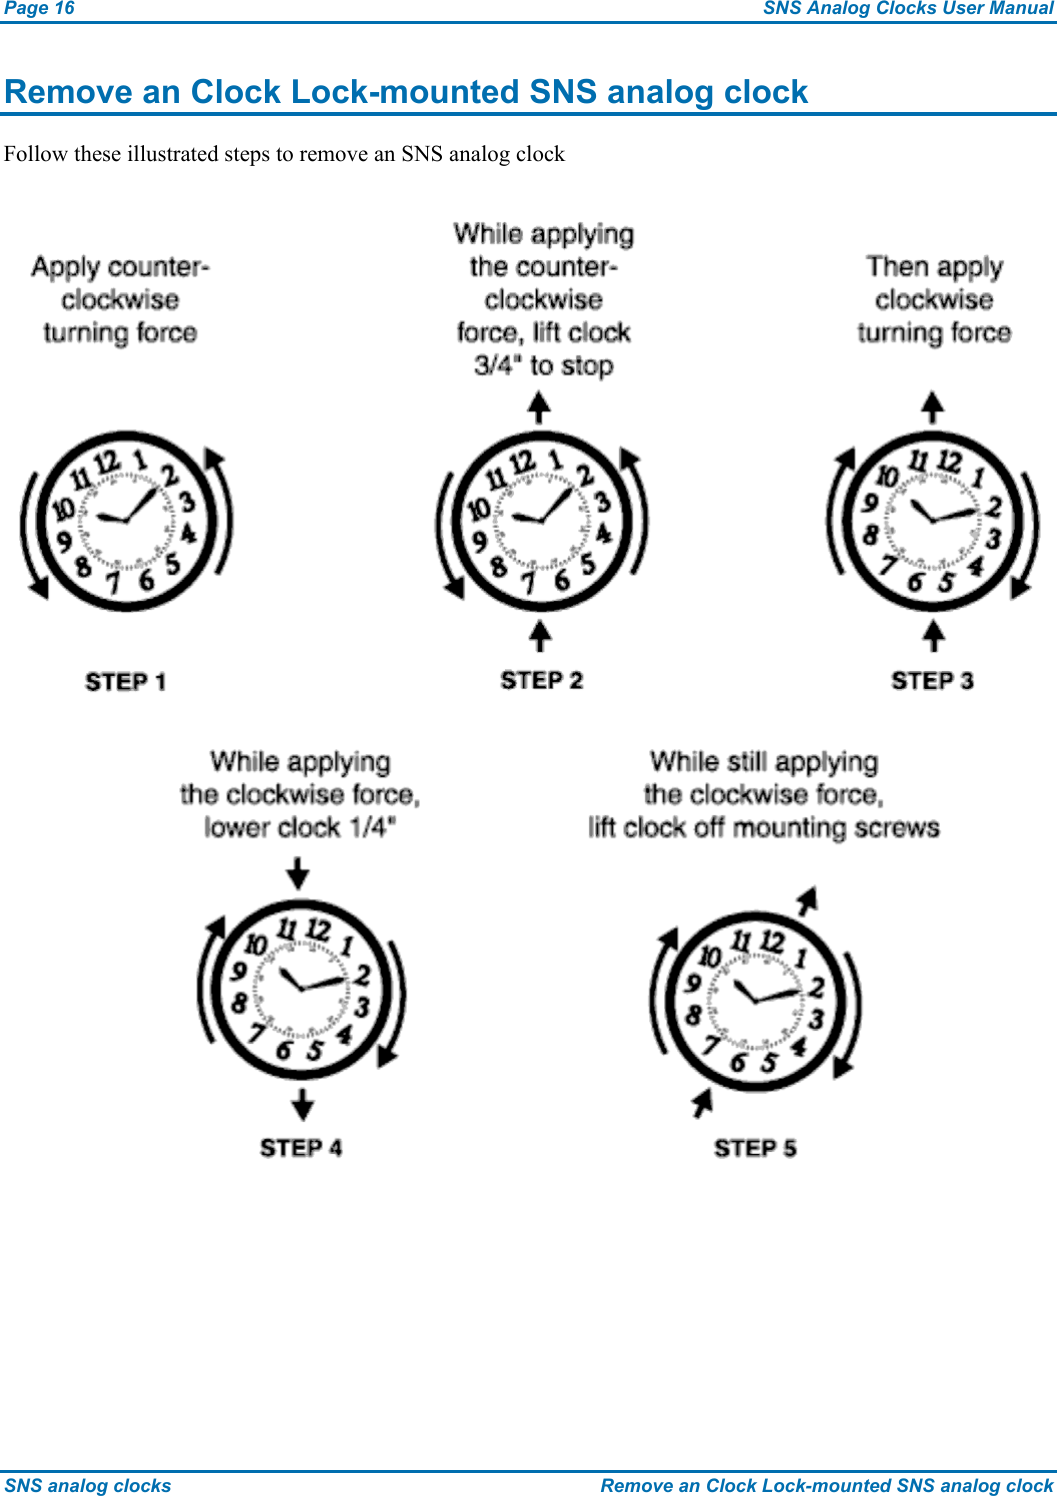 Page 16  SNS Analog Clocks User Manual SNS analog clocks  Remove an Clock Lock-mounted SNS analog clock Remove an Clock Lock-mounted SNS analog clock Follow these illustrated steps to remove an SNS analog clock  